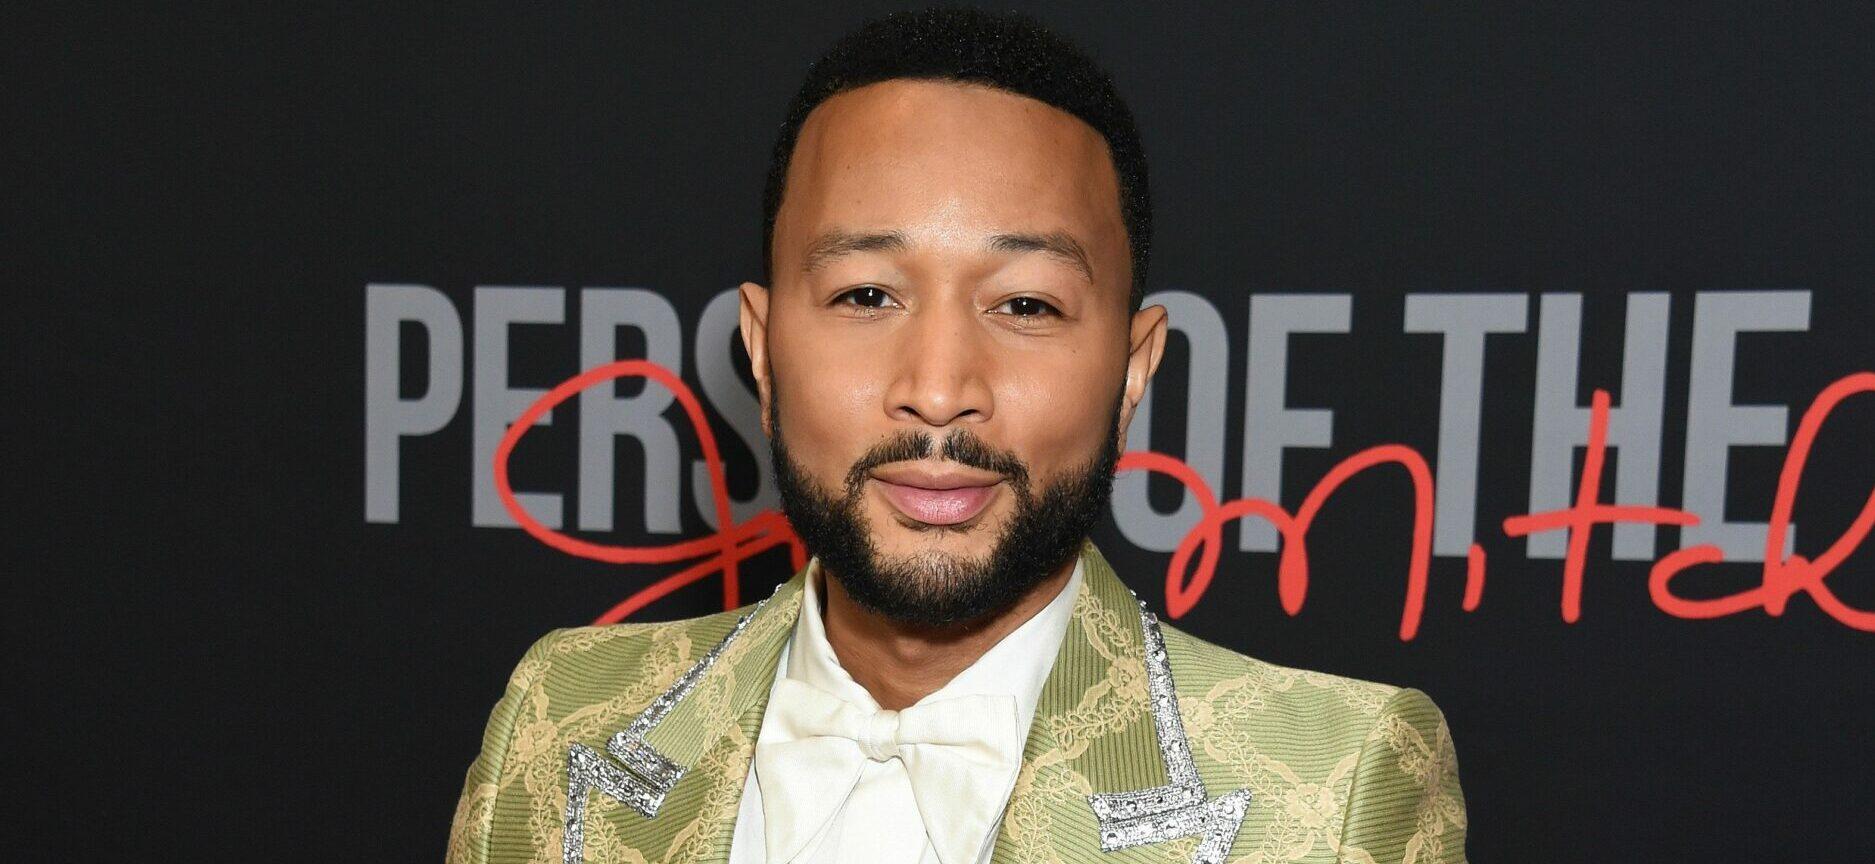 31st Annual MusiCares Person of the Year Gala. 01 Apr 2022 Pictured: John Legend.